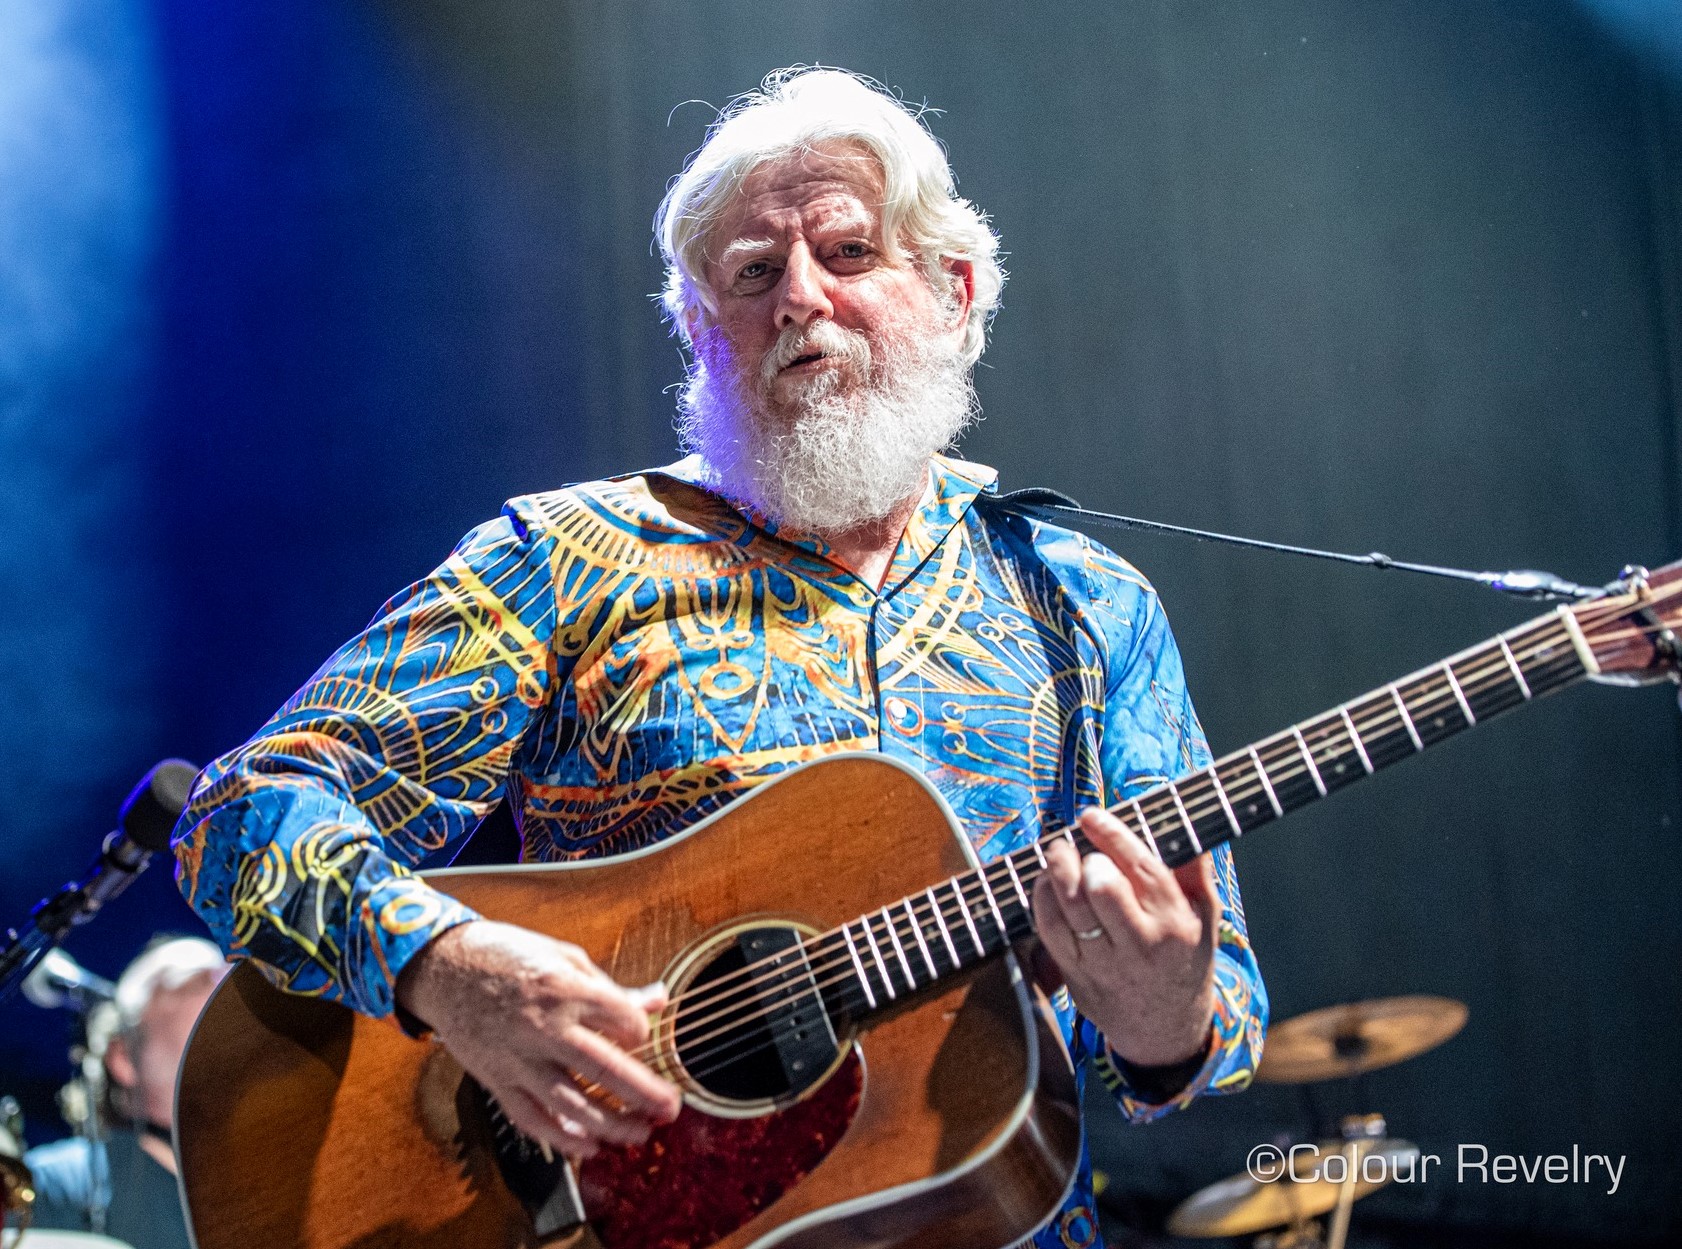 Bill Nershi | The String Cheese Incident